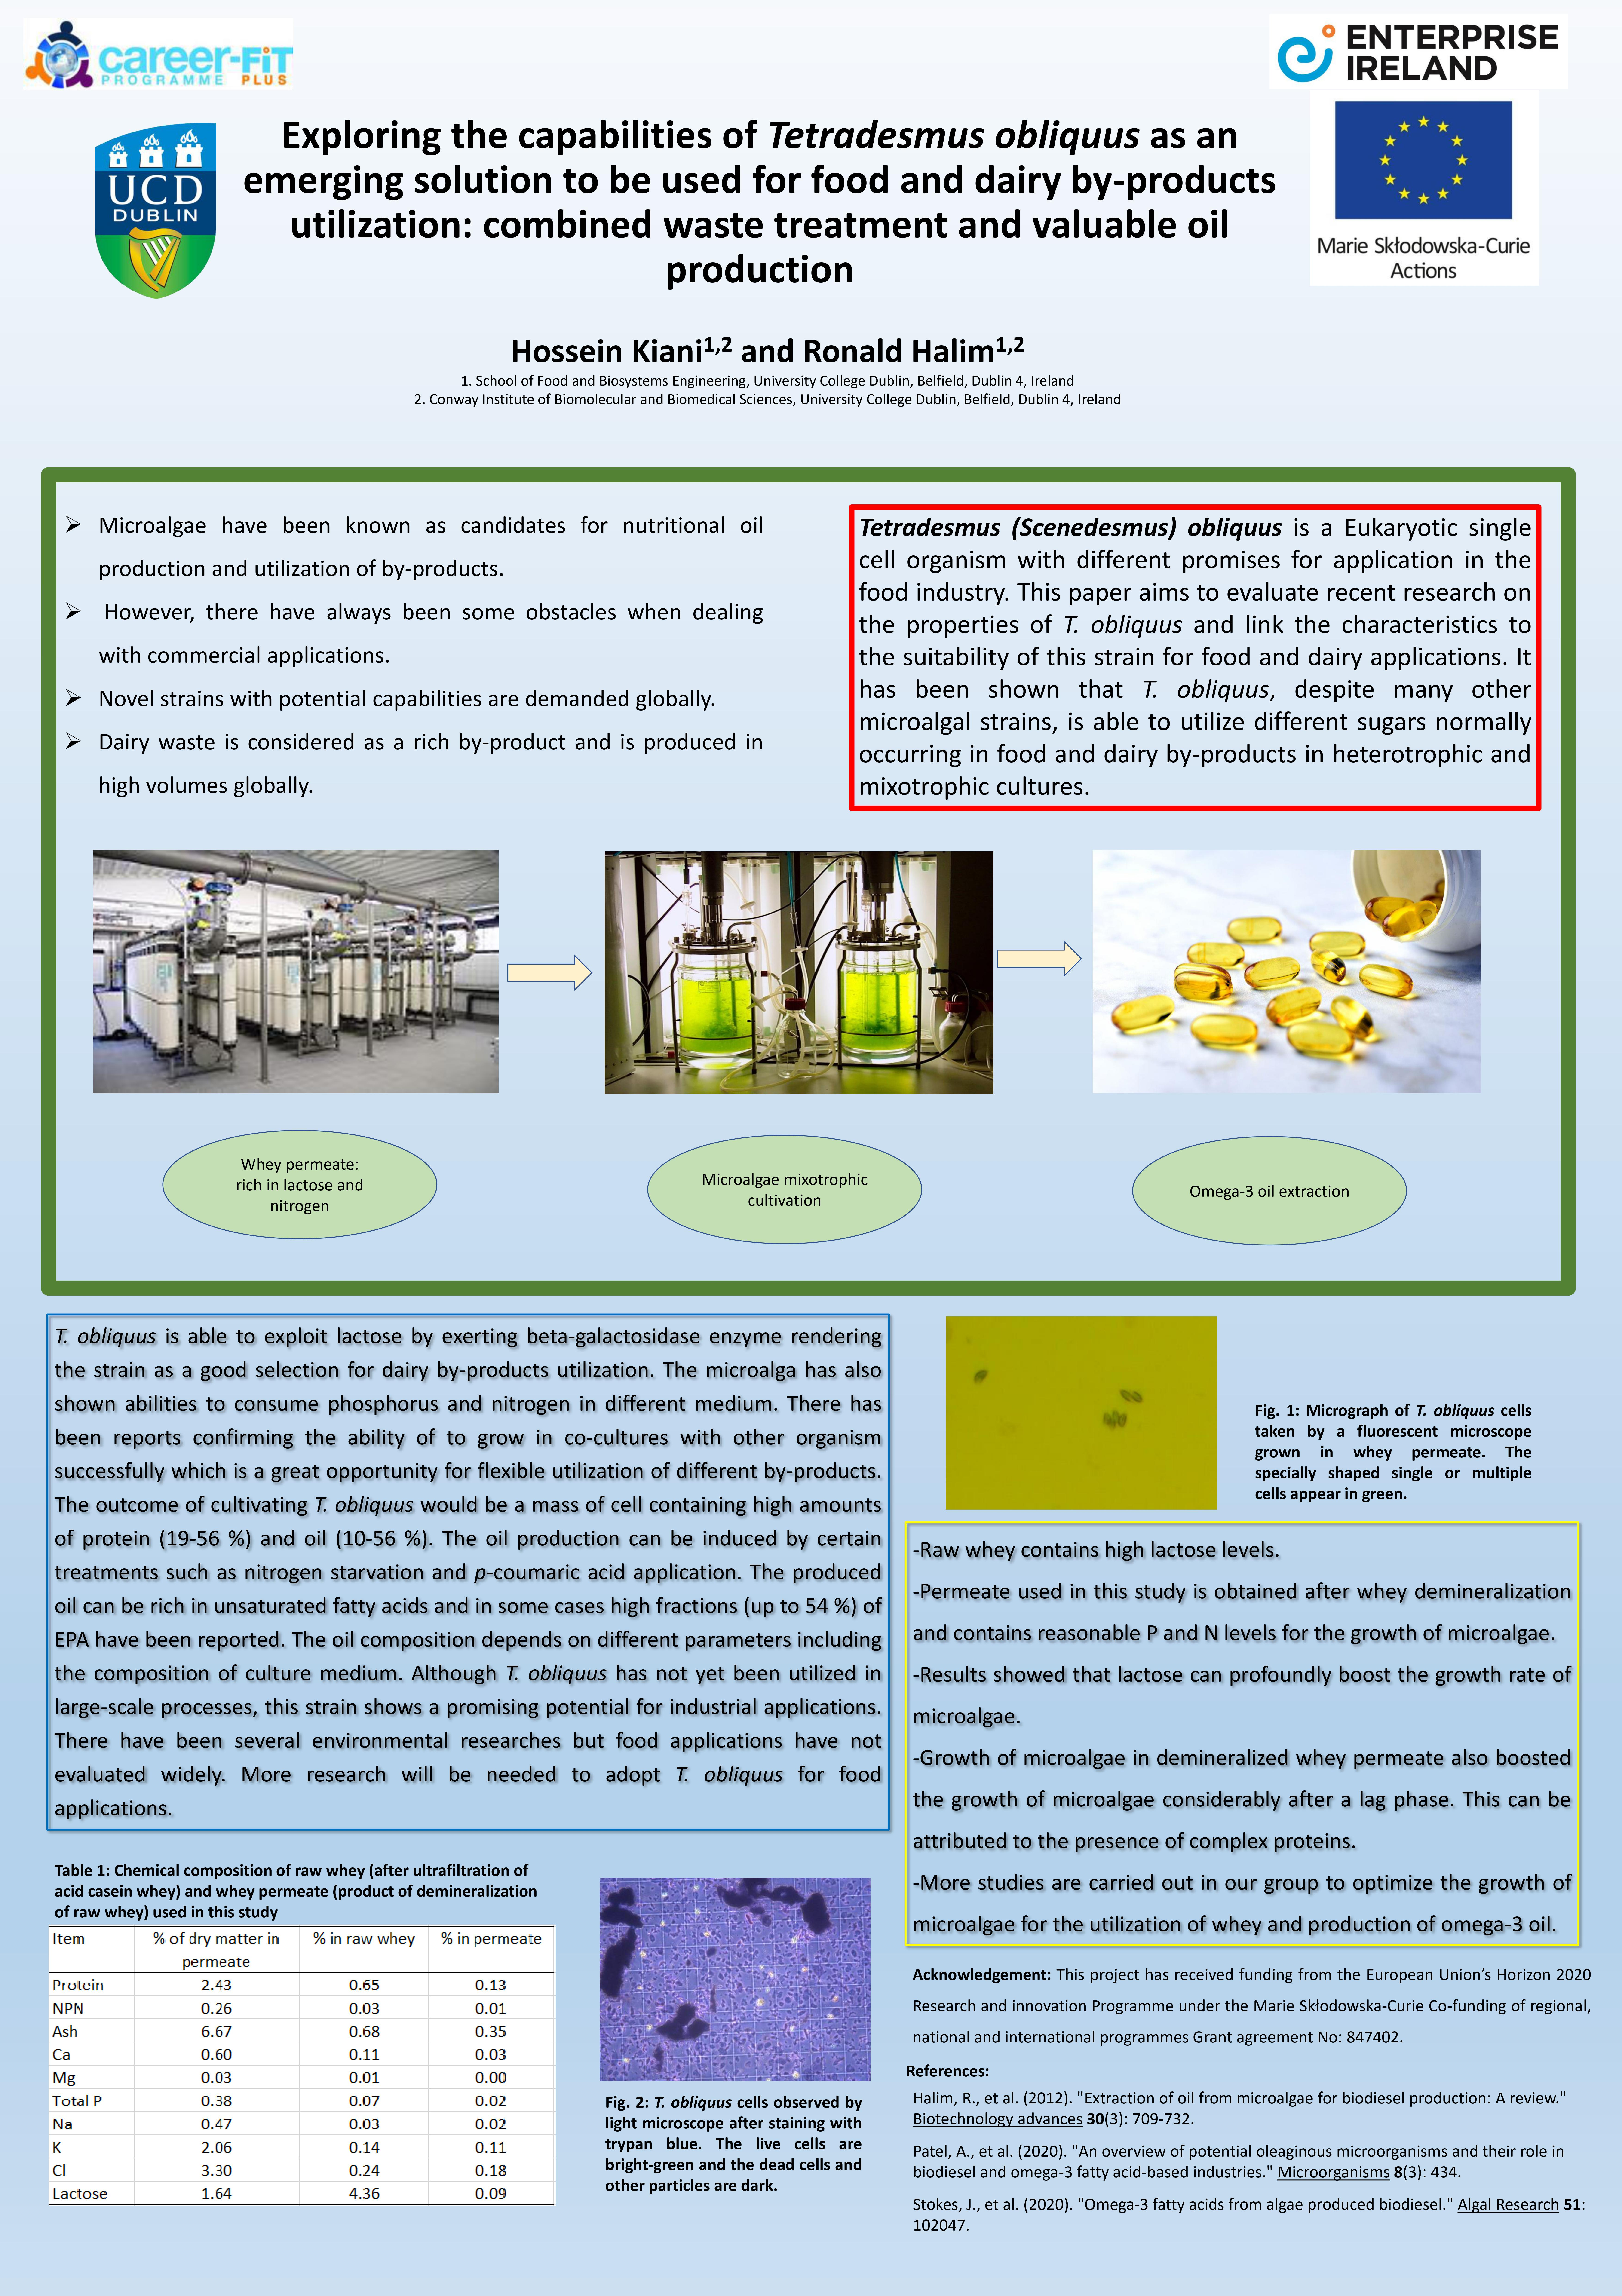 35th EFFoST International Conference POSTER